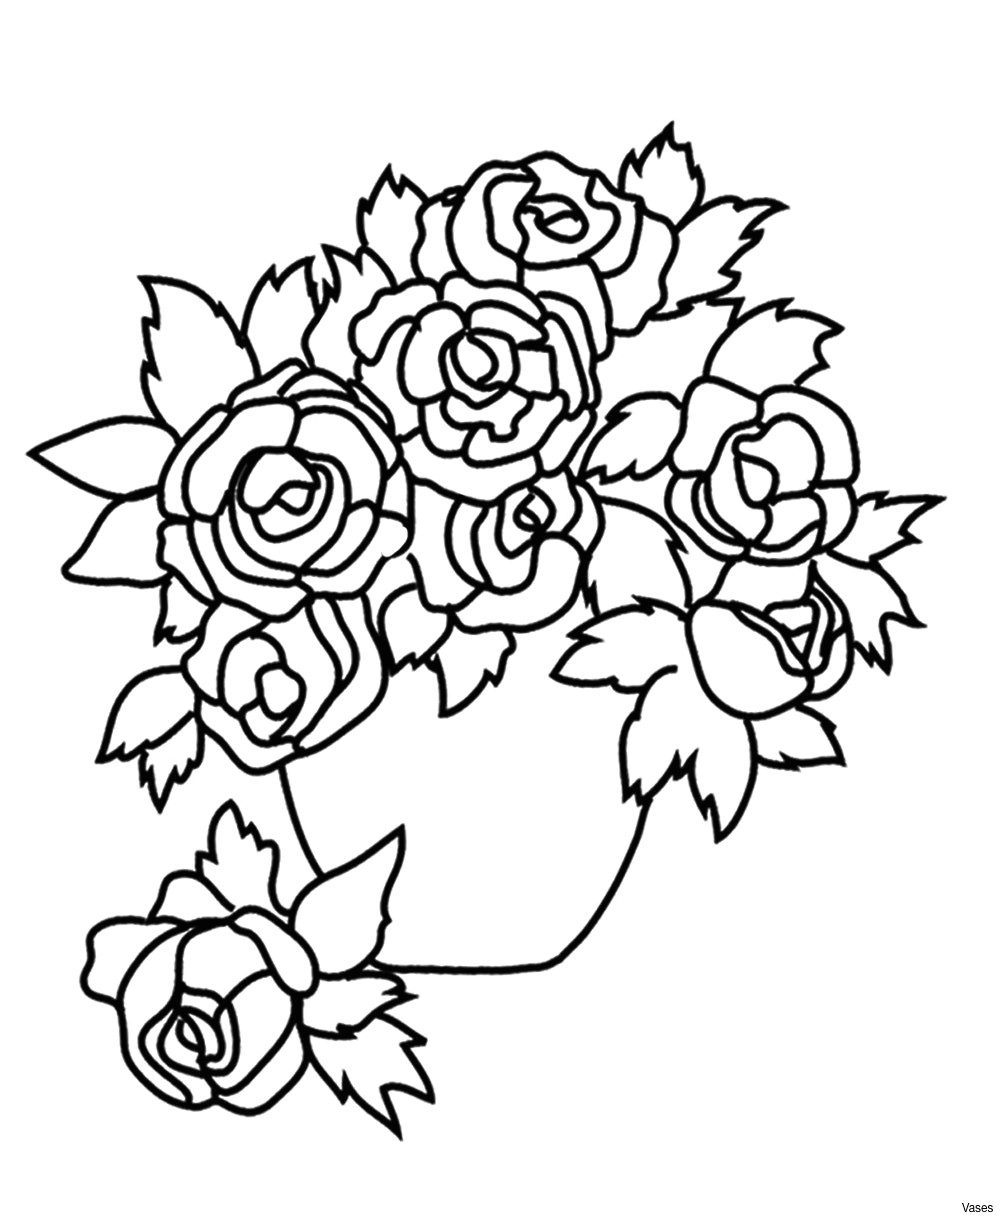 Drawings Of Roses In A Vase Flower Coloring Pages for Adults New Cool Vases Flower Vase Coloring